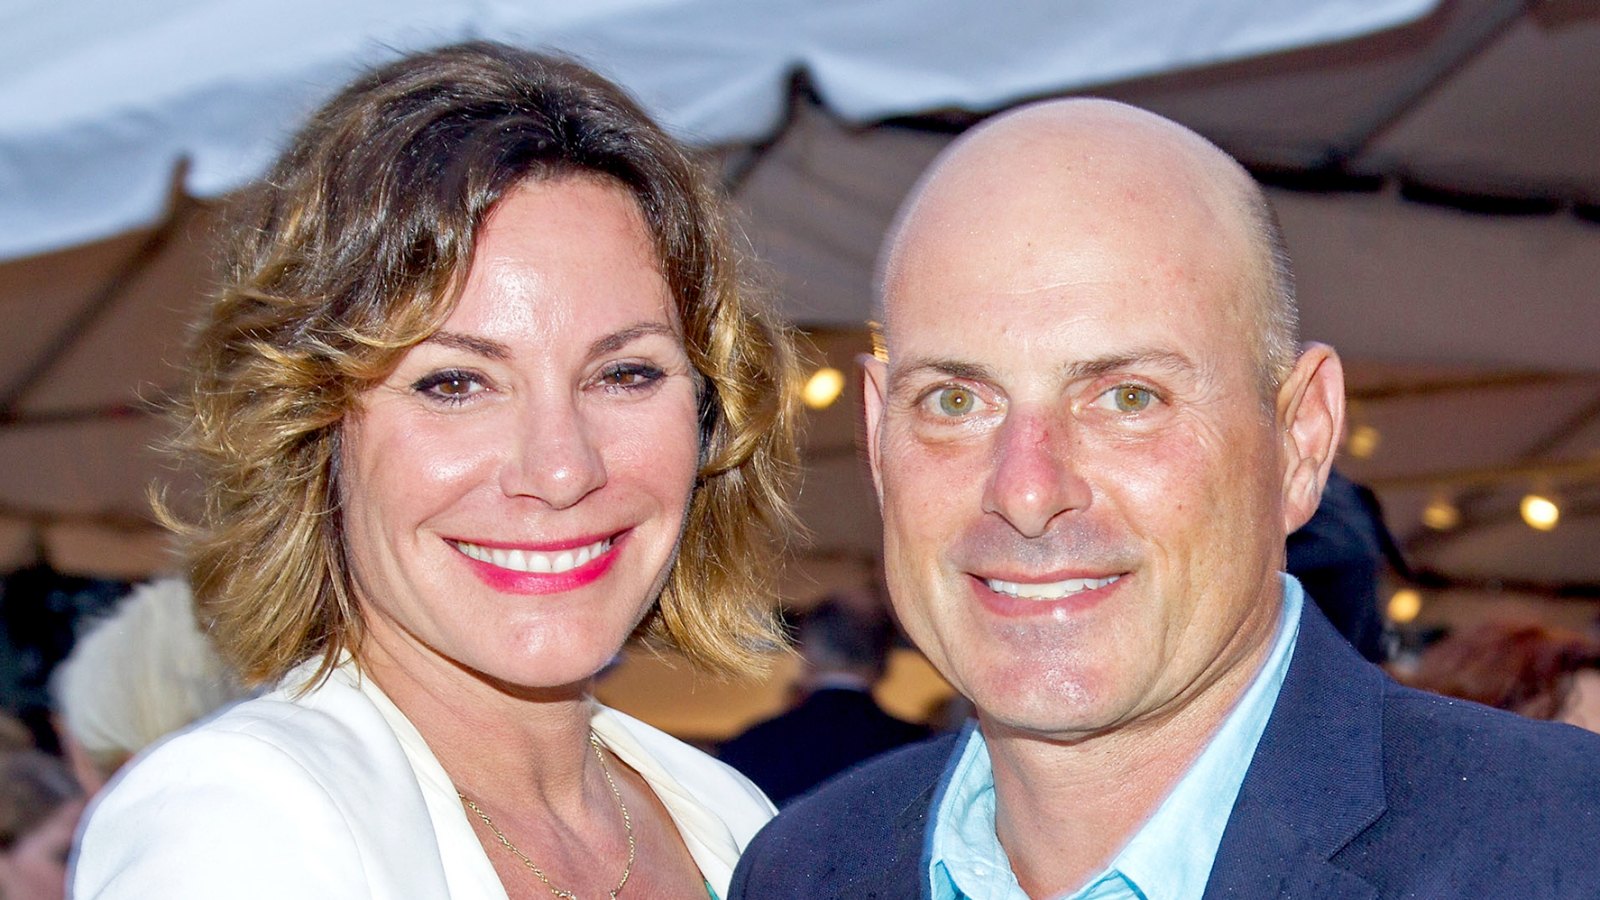 Luann de Lesseps and Tom D'Agostino Jr. attend the 23rd Annual Watermill Summer Benefit at The Watermill Center on July 30, 2016 in Water Mill, New York.